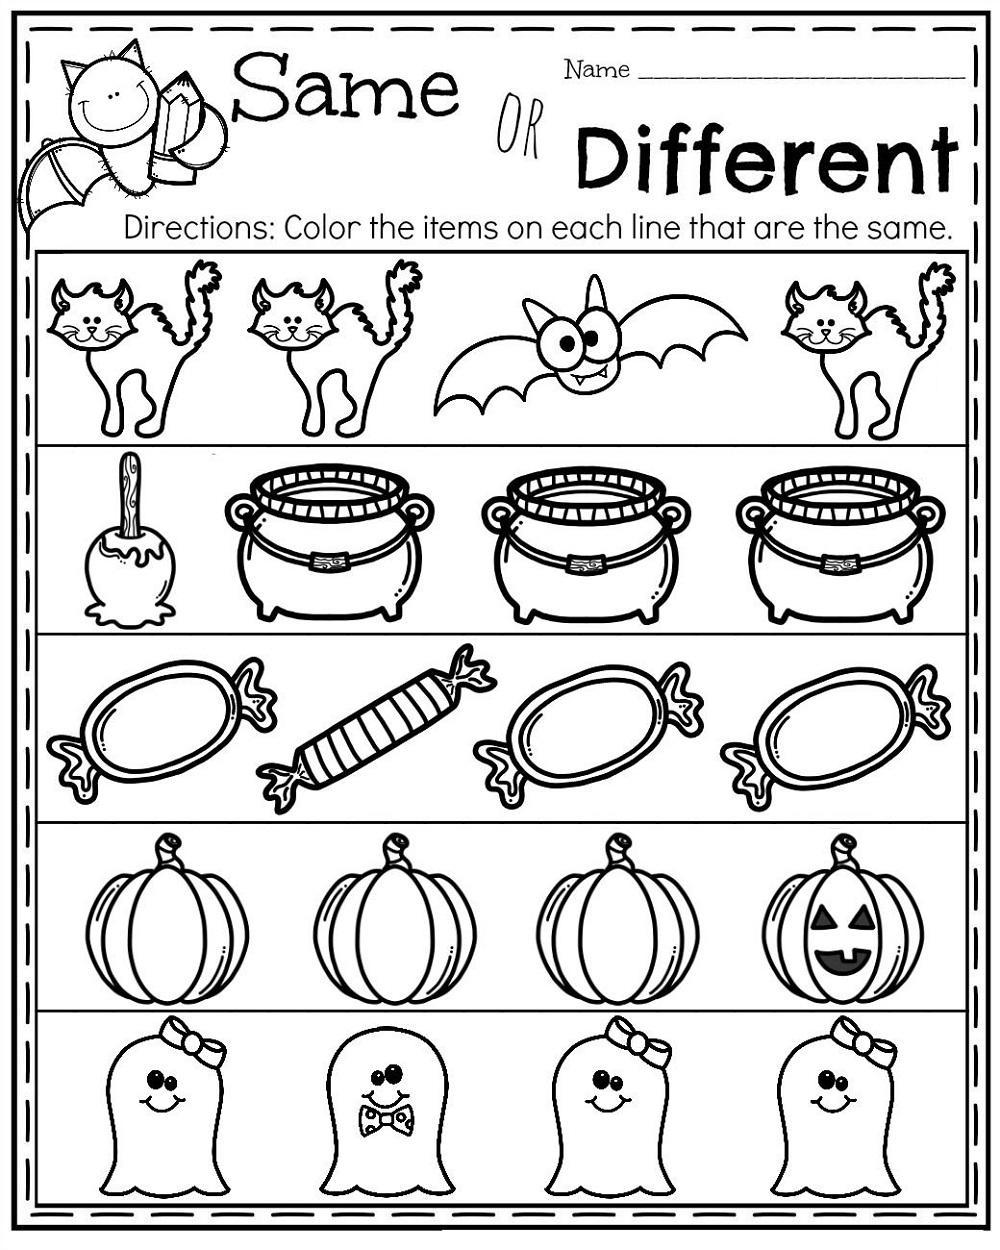 Same Different Worksheets Printable In 2020 | Halloween